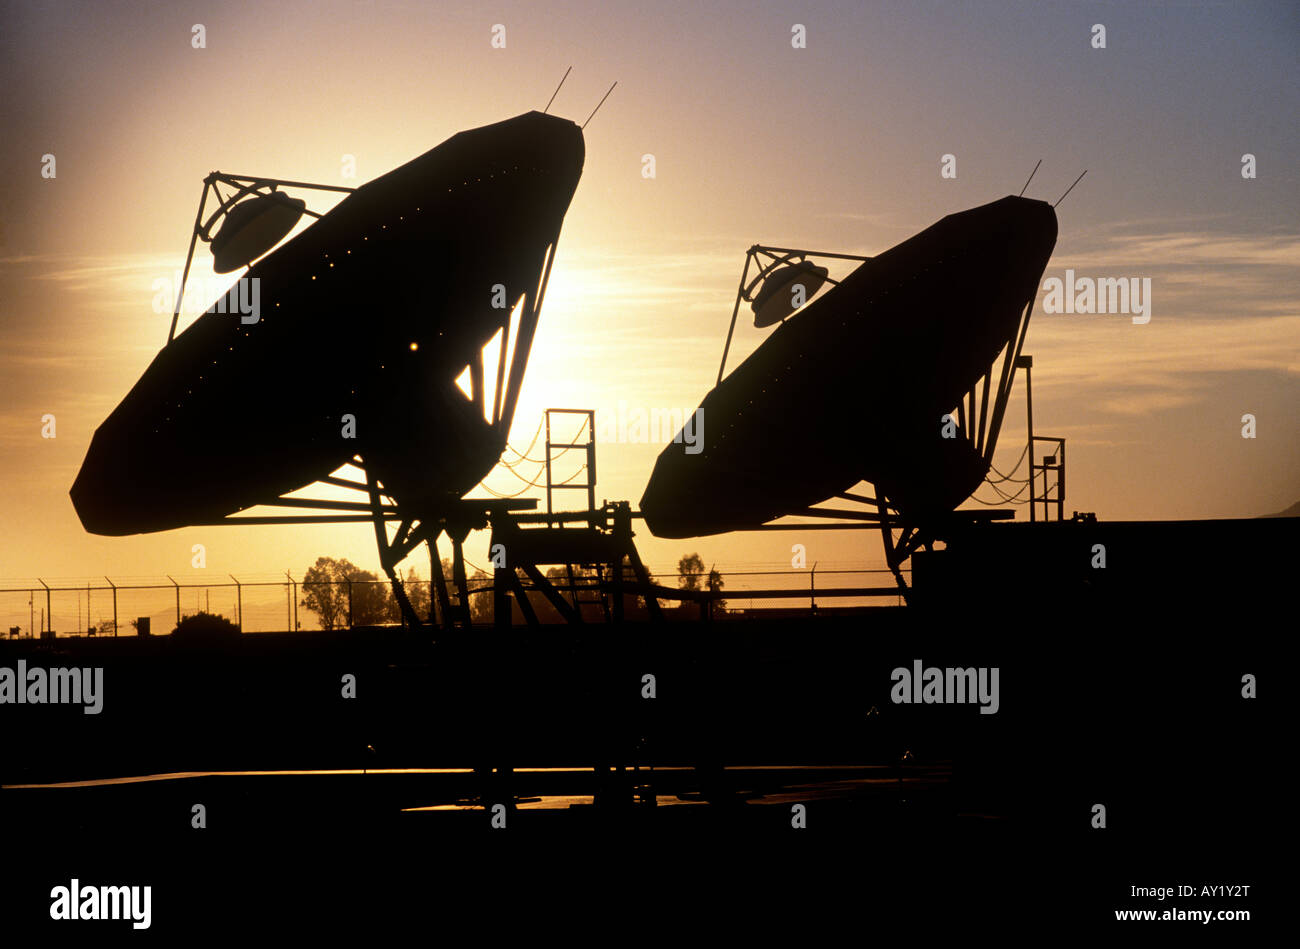 Communications satellite dishes pointing skyward Stock Photo